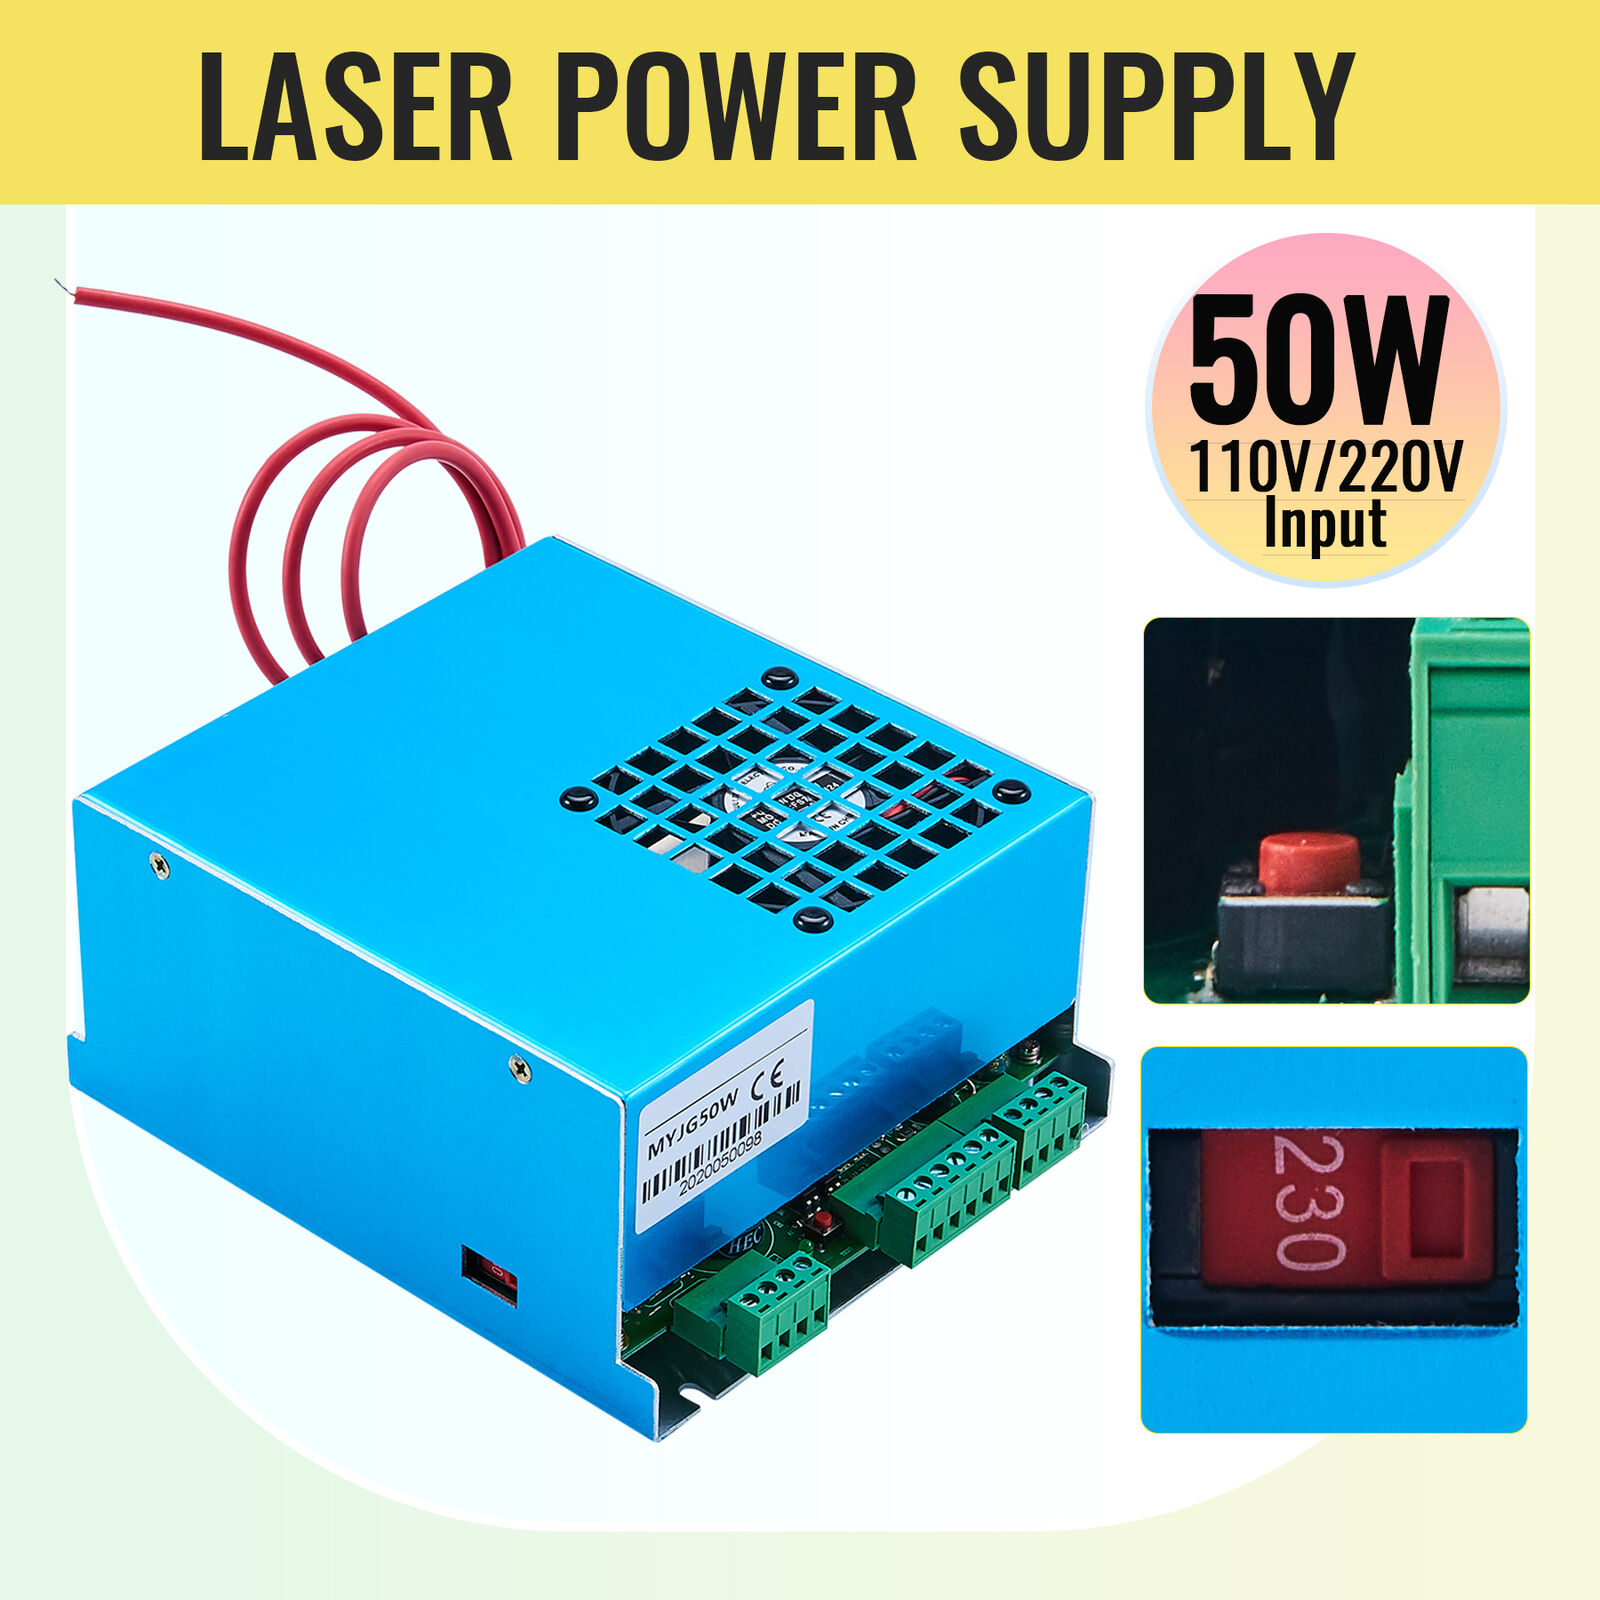 Now free shipping 50W CO2 Laser Power Supply 110V 220V Cutters for Engravers Engra Max 71% OFF